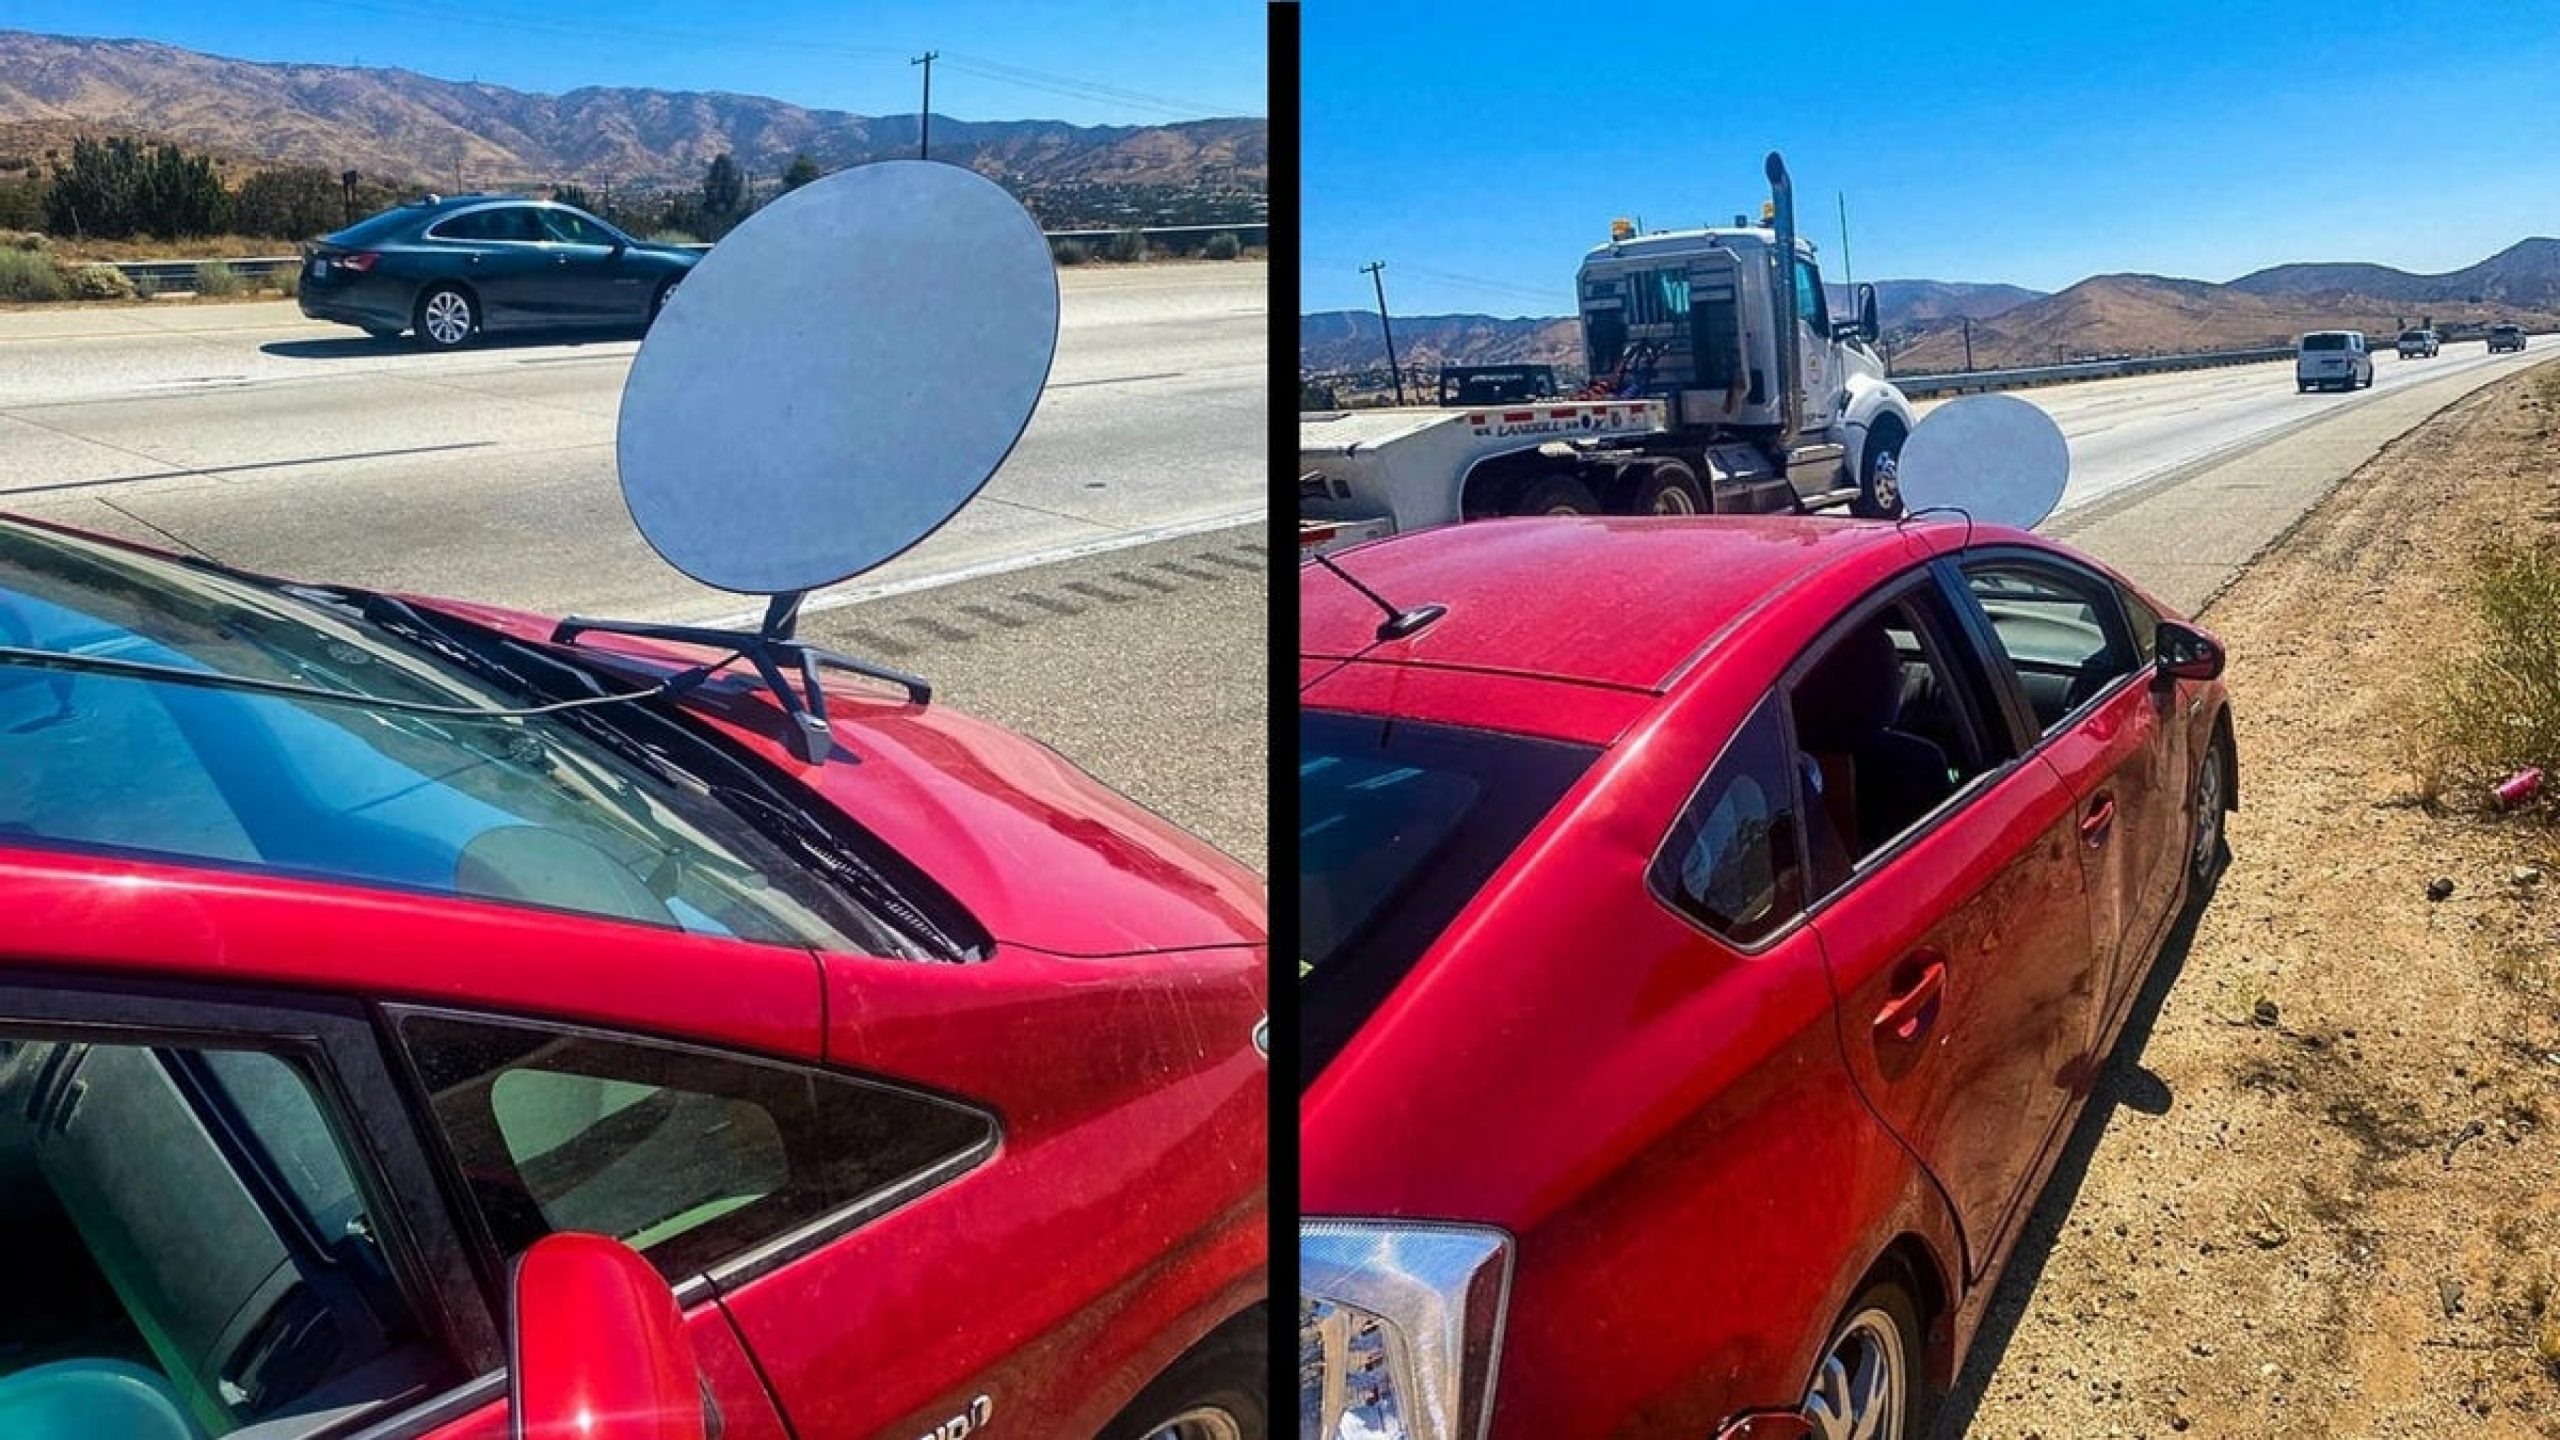 You Can’t Just Slap a Starlink Dish Onto Your Car, California Motorist Finds Out